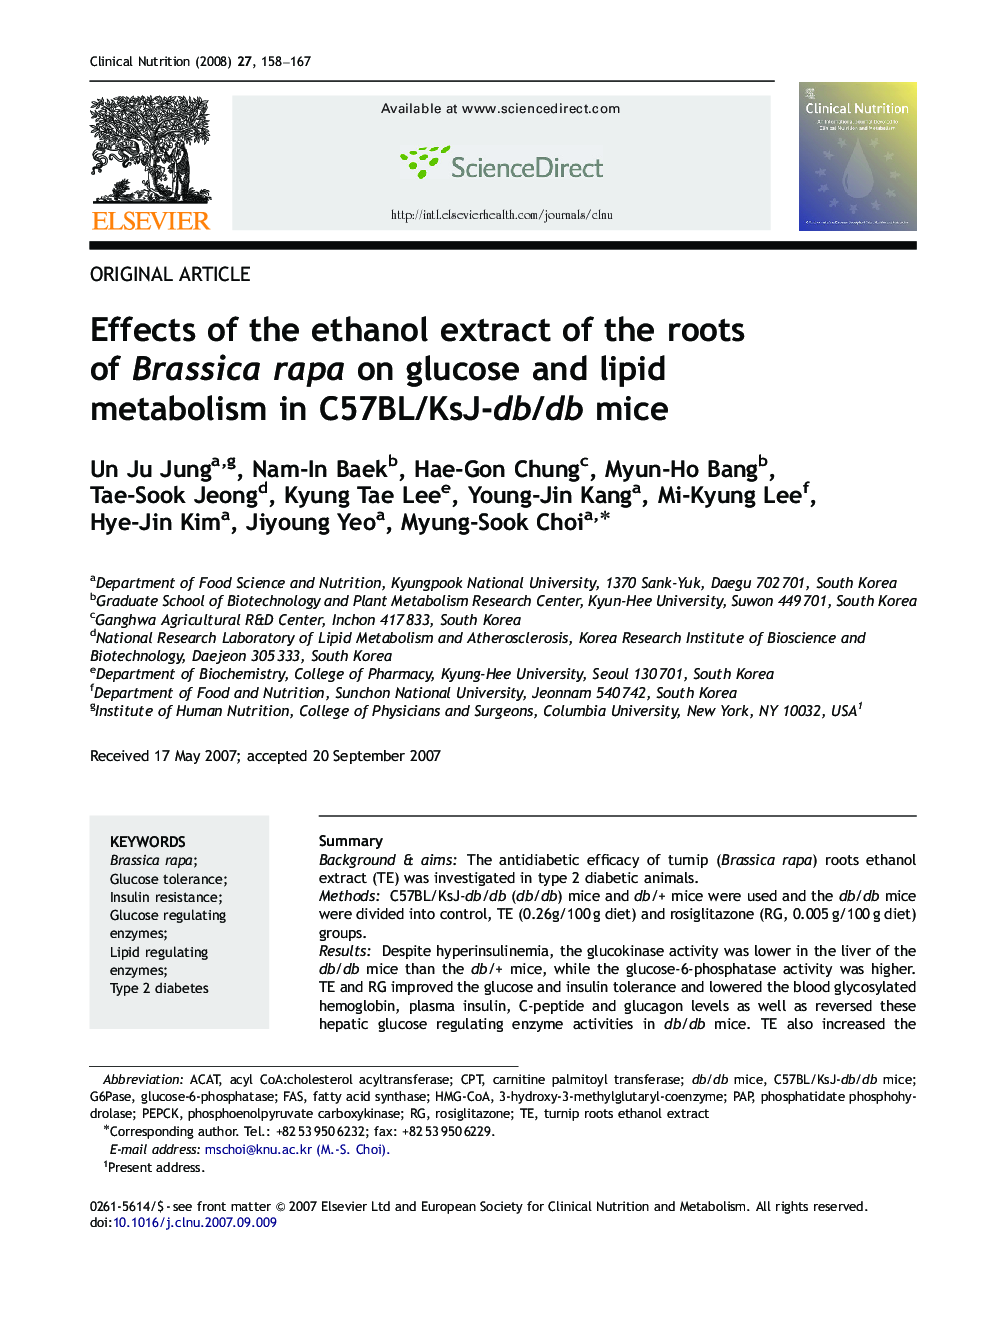 Effects of the ethanol extract of the roots of Brassica rapa on glucose and lipid metabolism in C57BL/KsJ-db/db mice